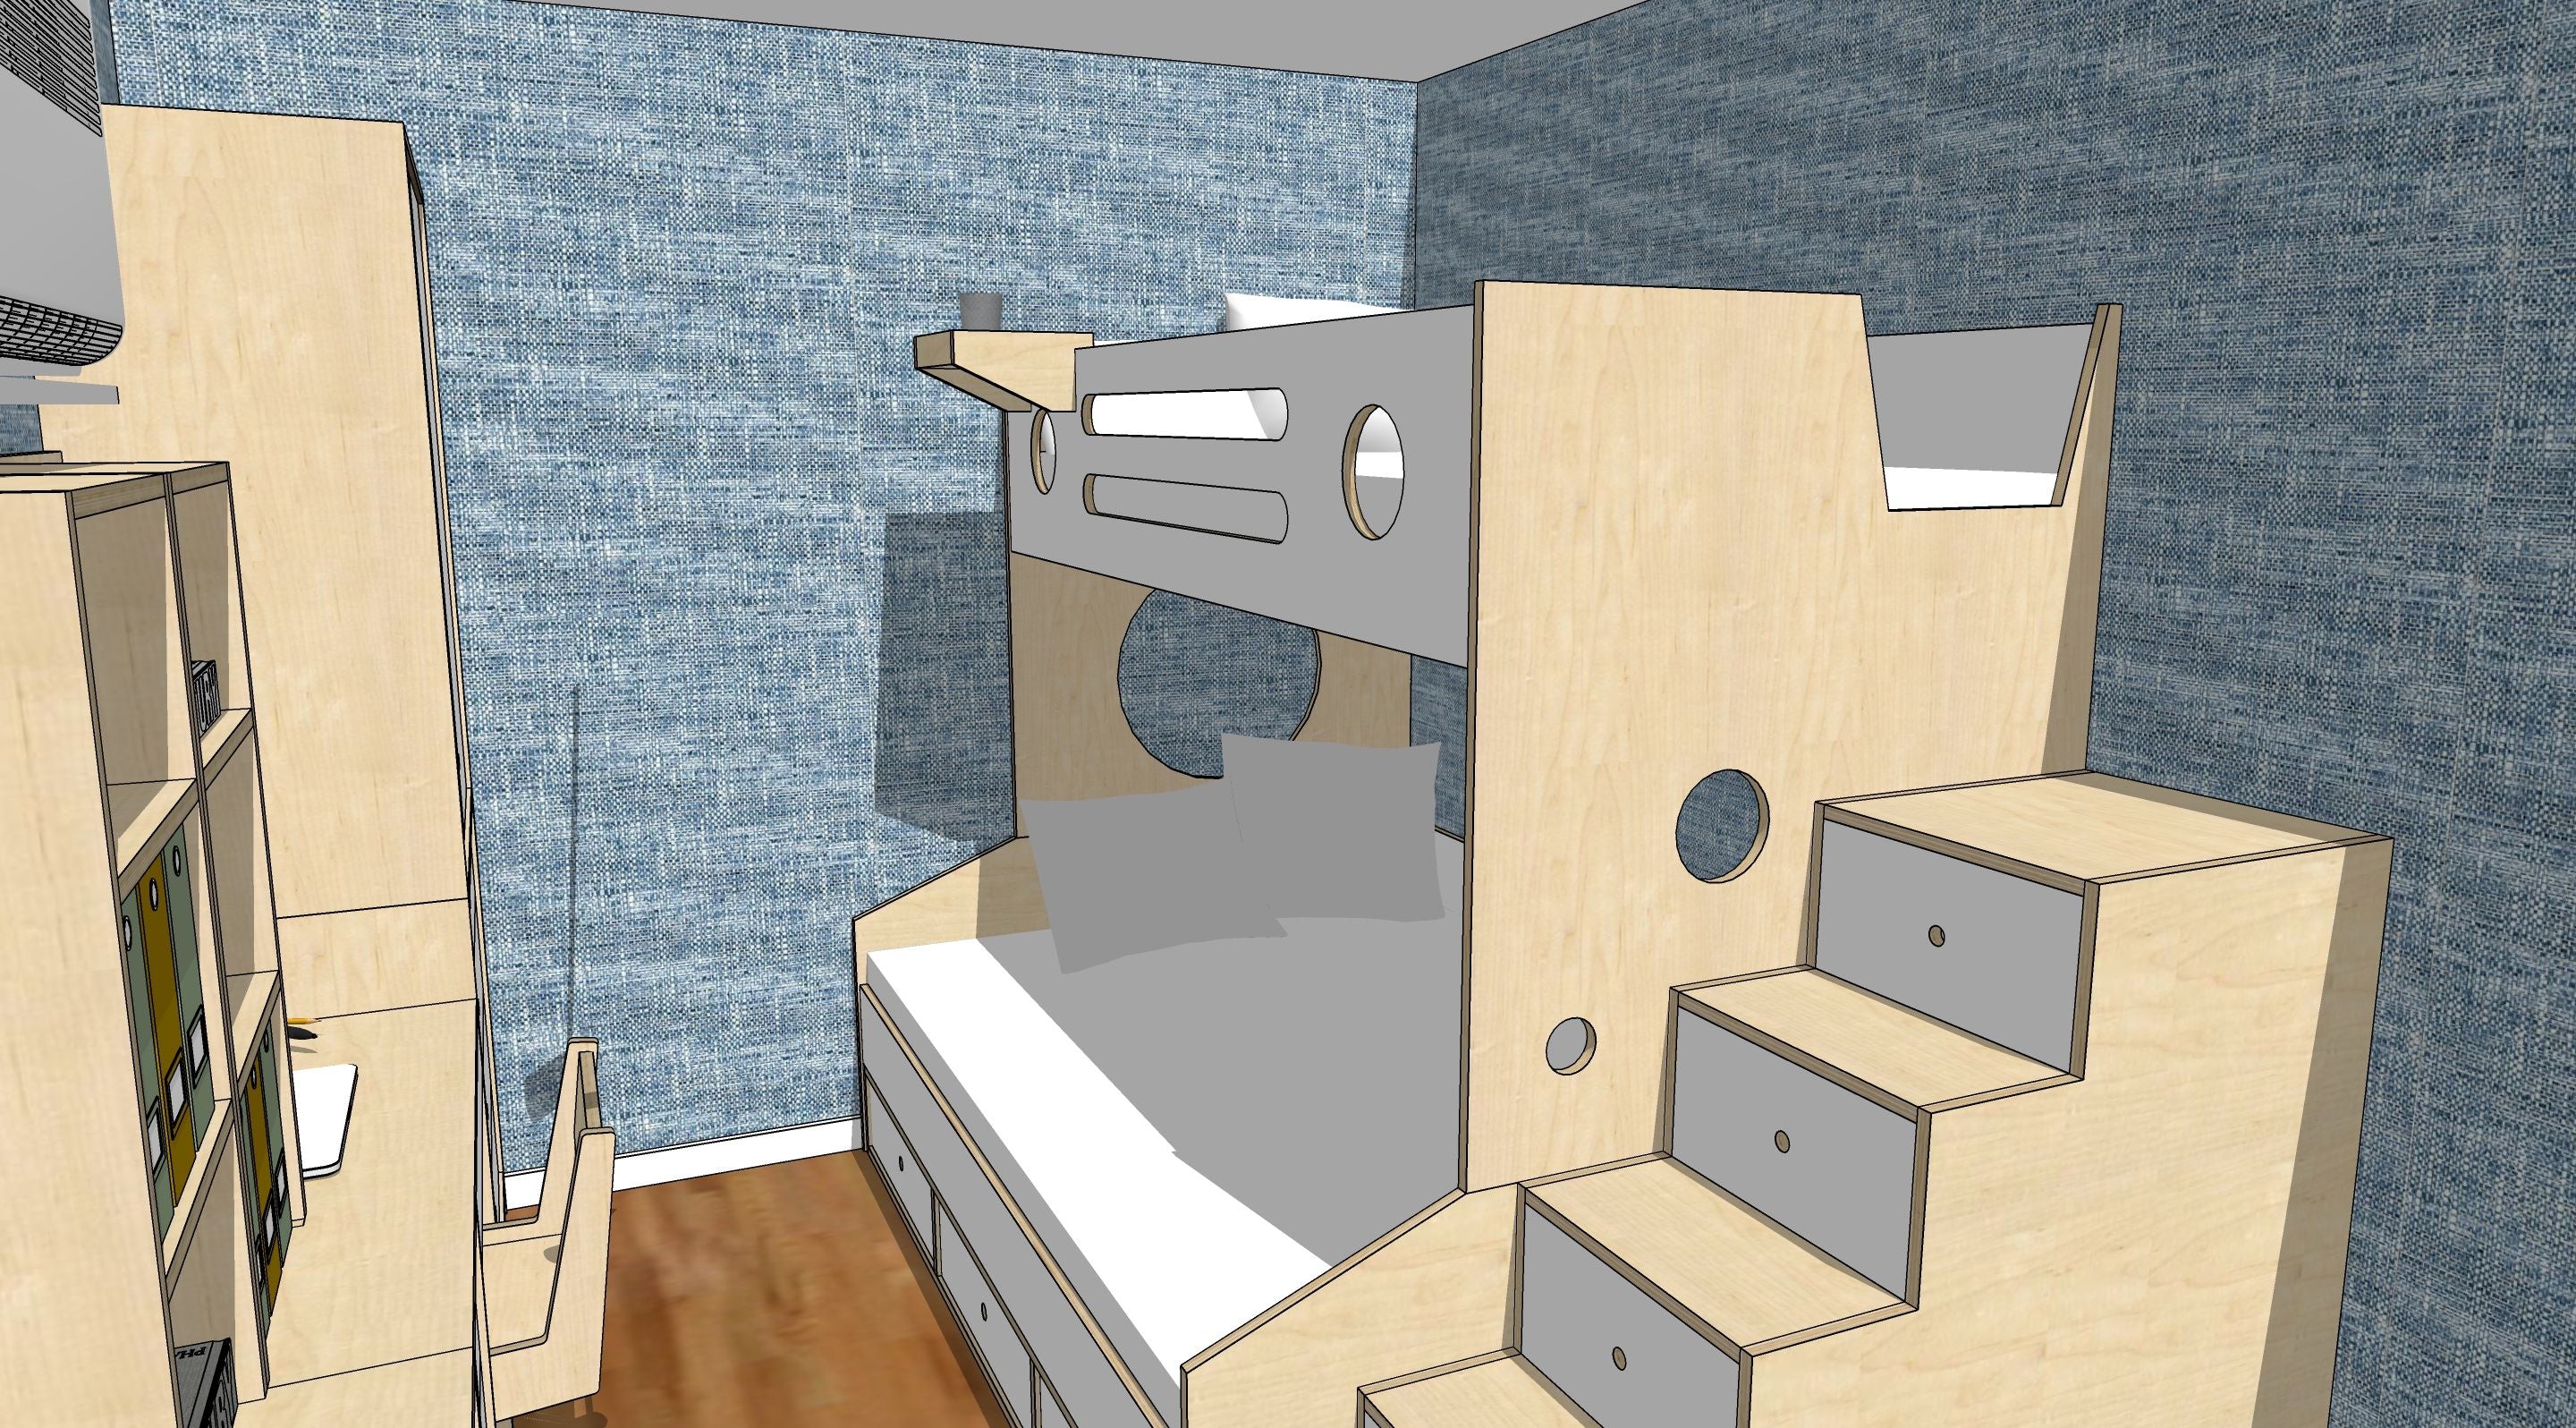 Bedroom floor plan with modular furniture and Marino bunk bed.